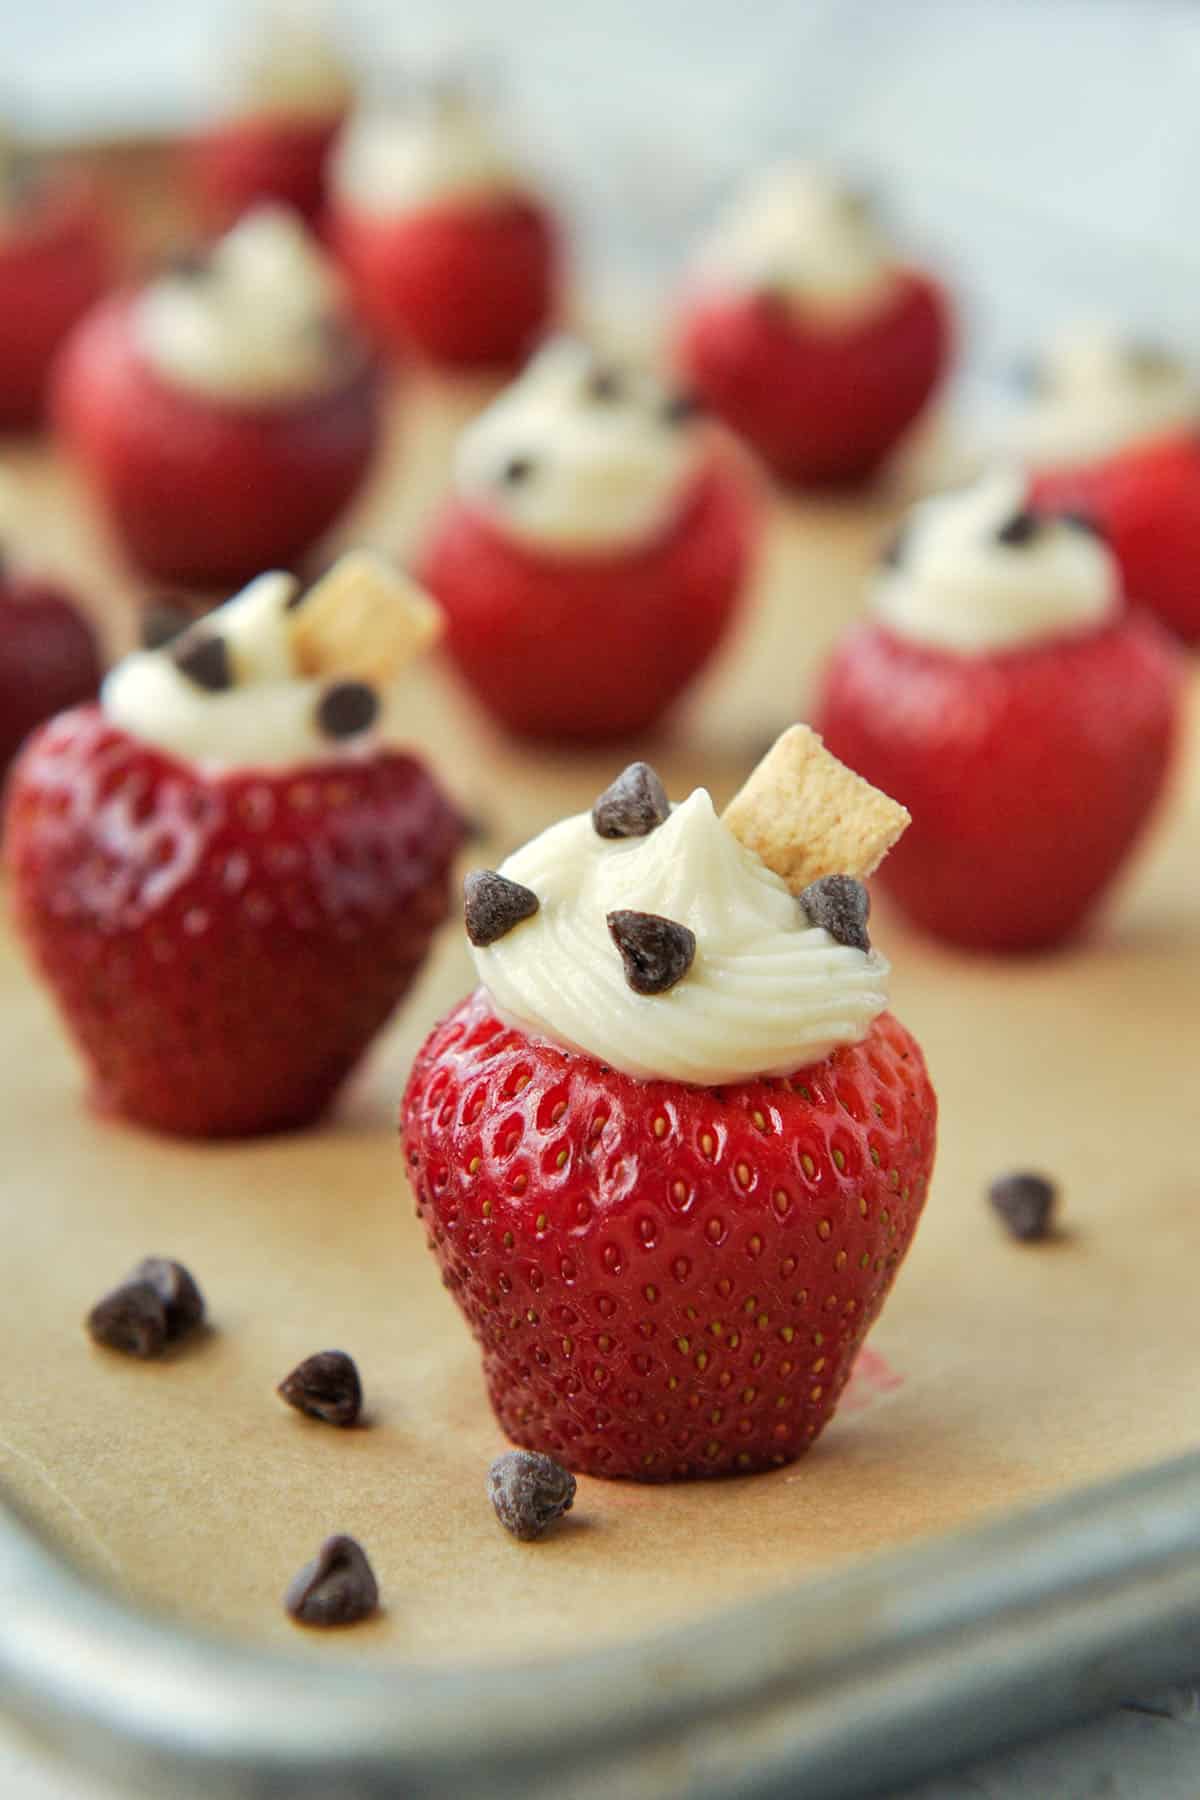 Up close of a strawberry stuffed with cheesecake filling, sprinkled with mini chocolate chips and topped with a little chunk of graham cracker.